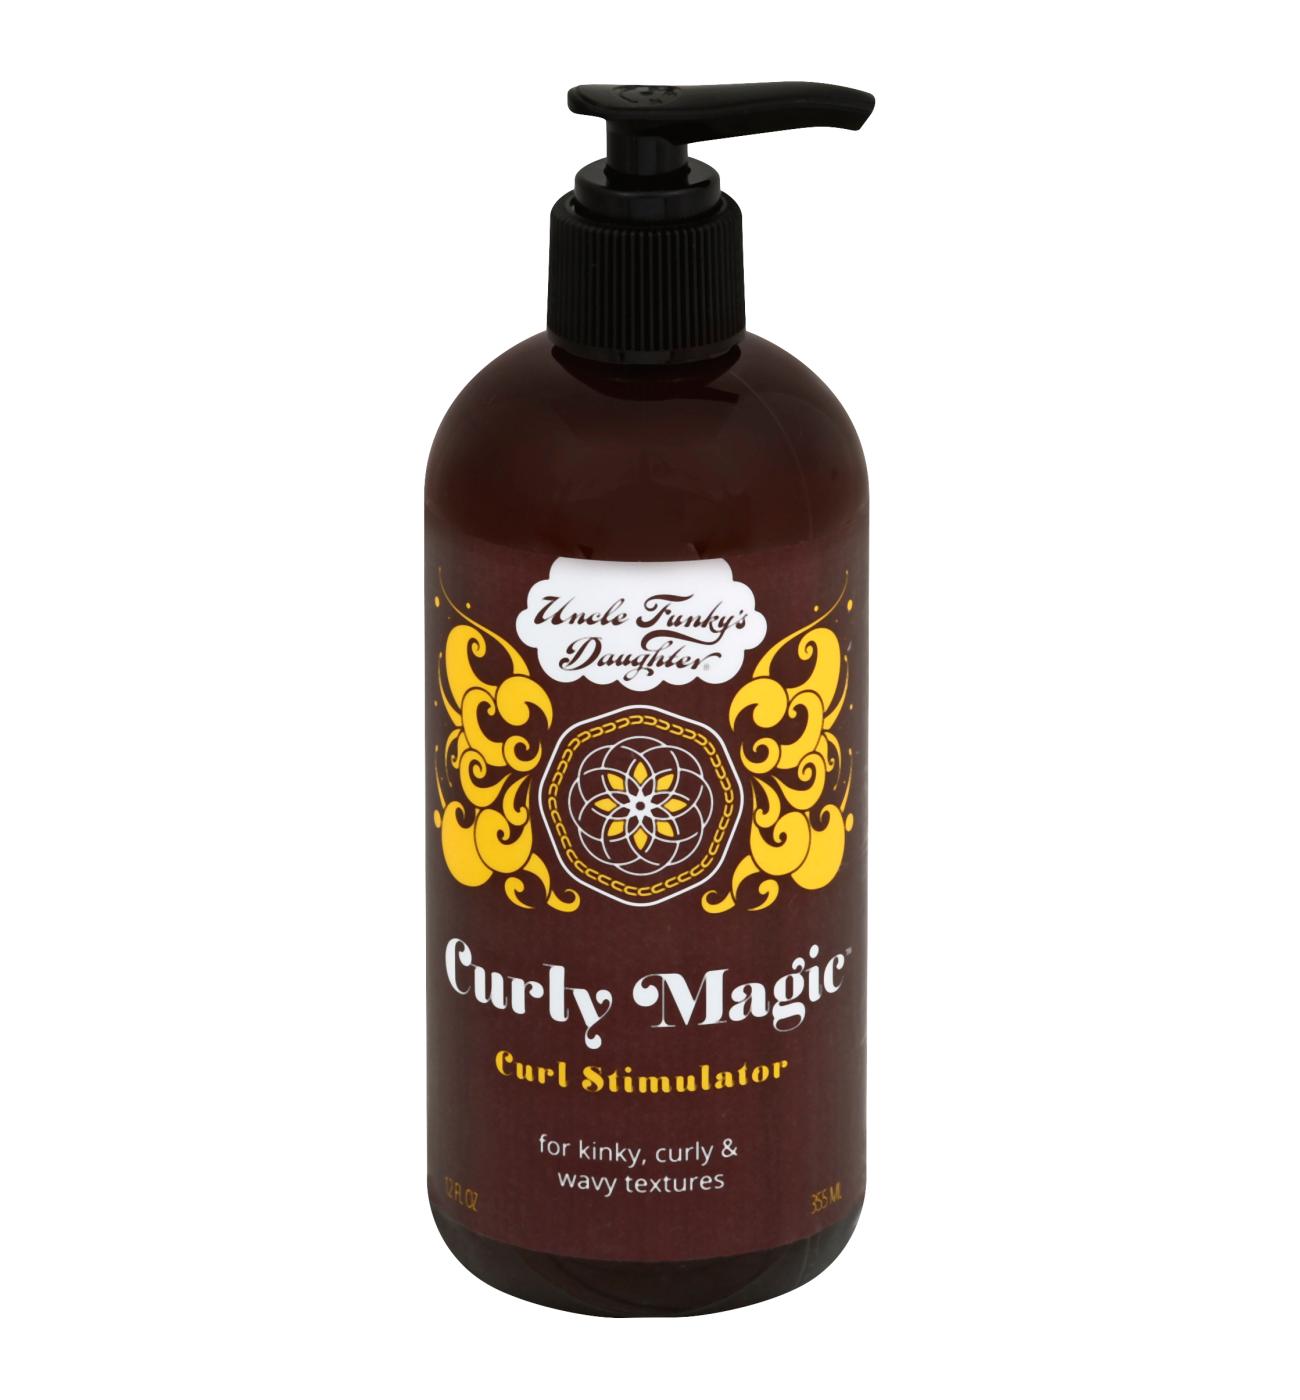 Uncle Funky's Daughter Curly Magic Curl Stimulator; image 1 of 2